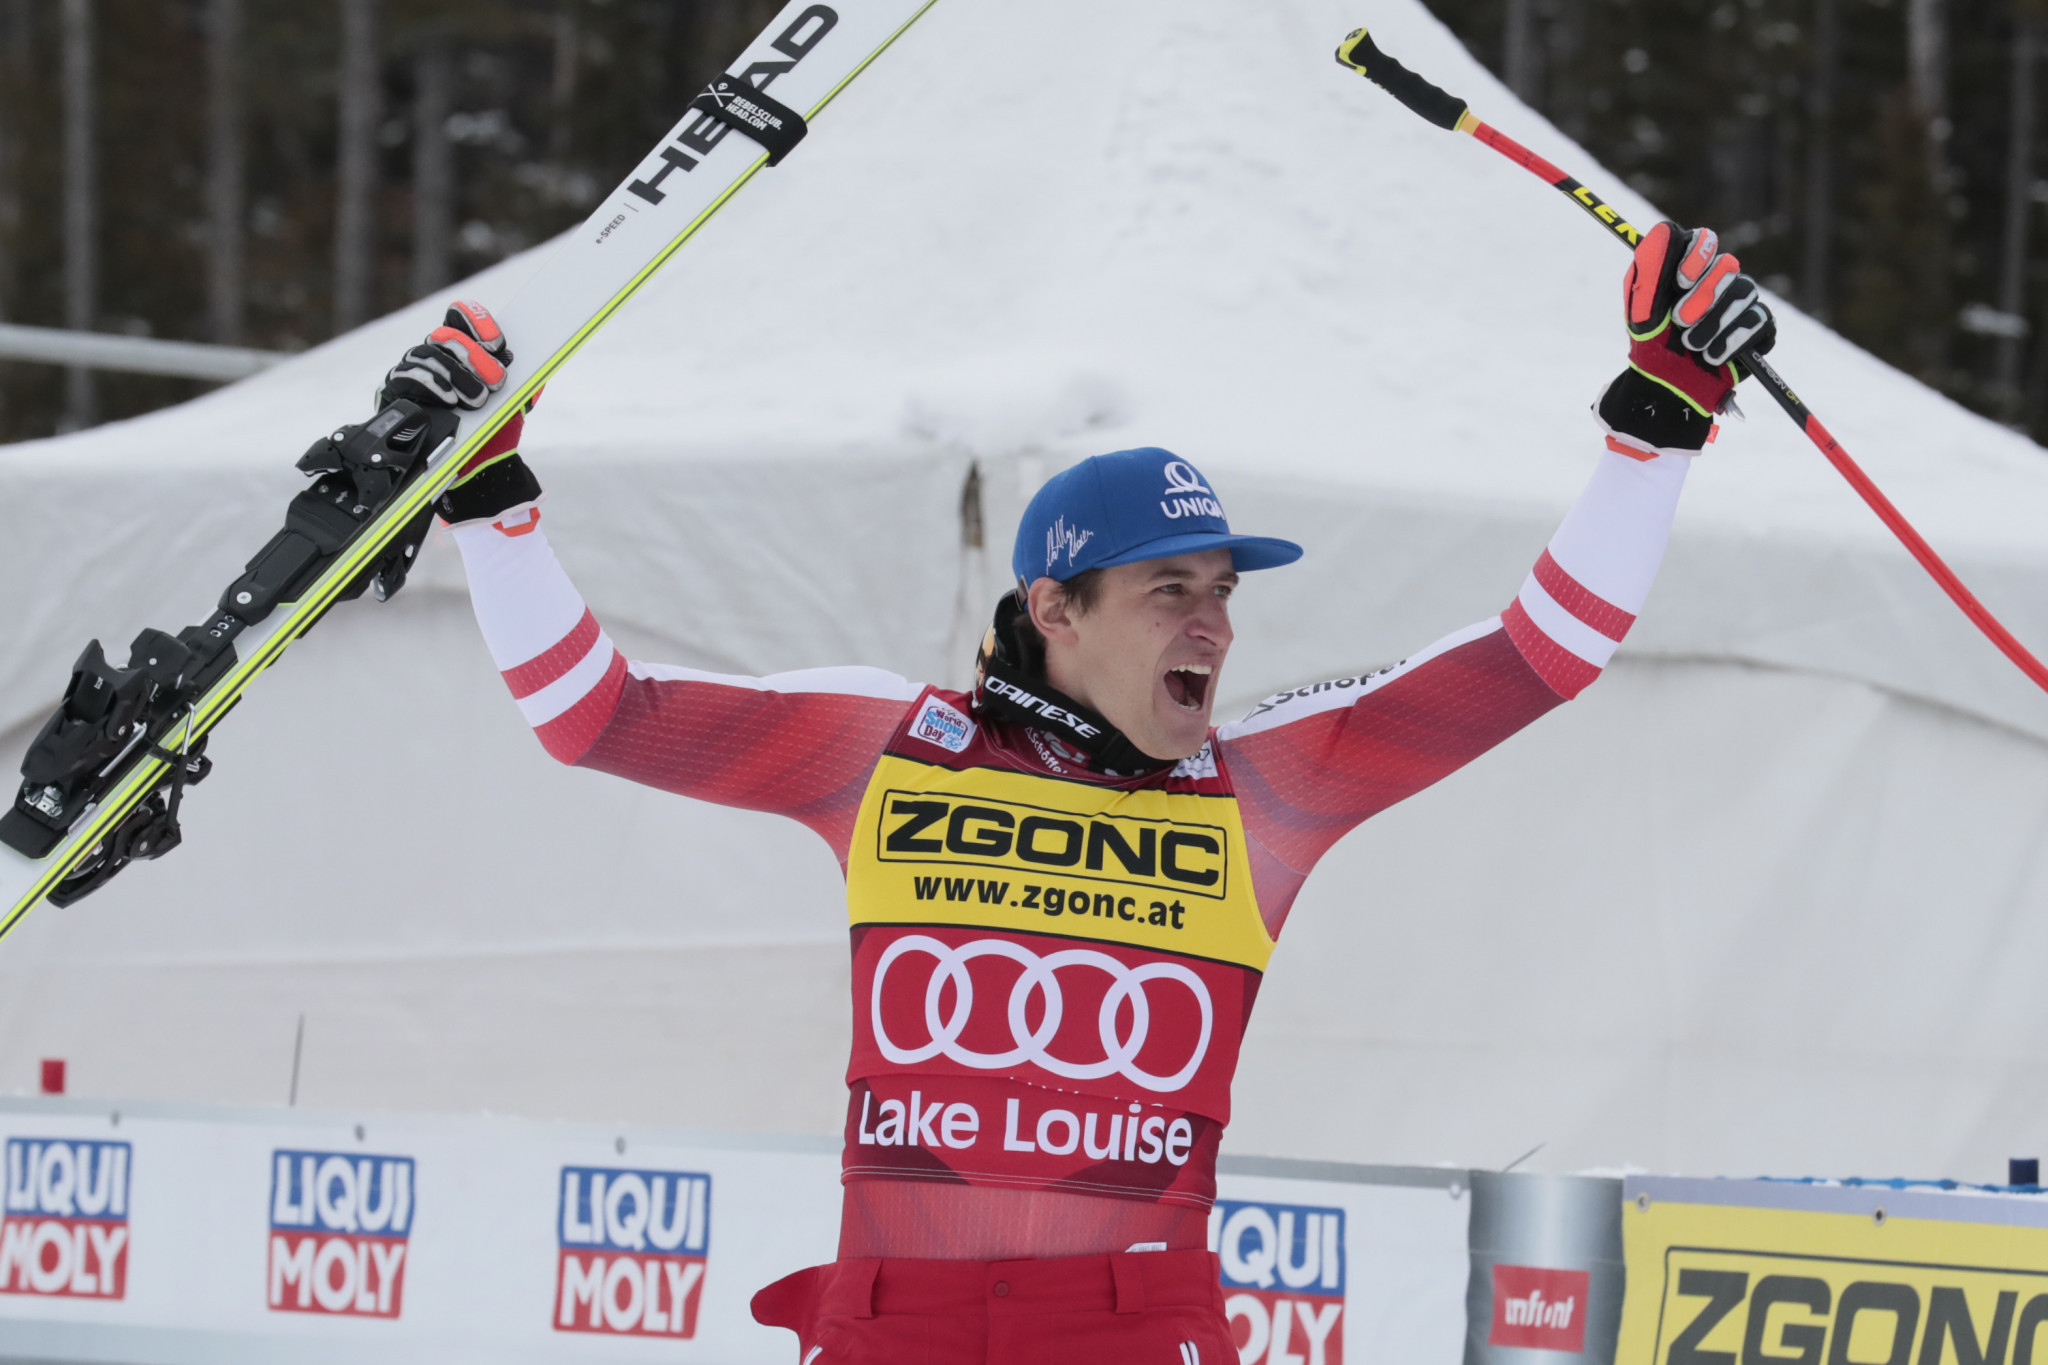 Matthias Mayer won the men's downhill yesterday in Lake Louise ©Getty Images